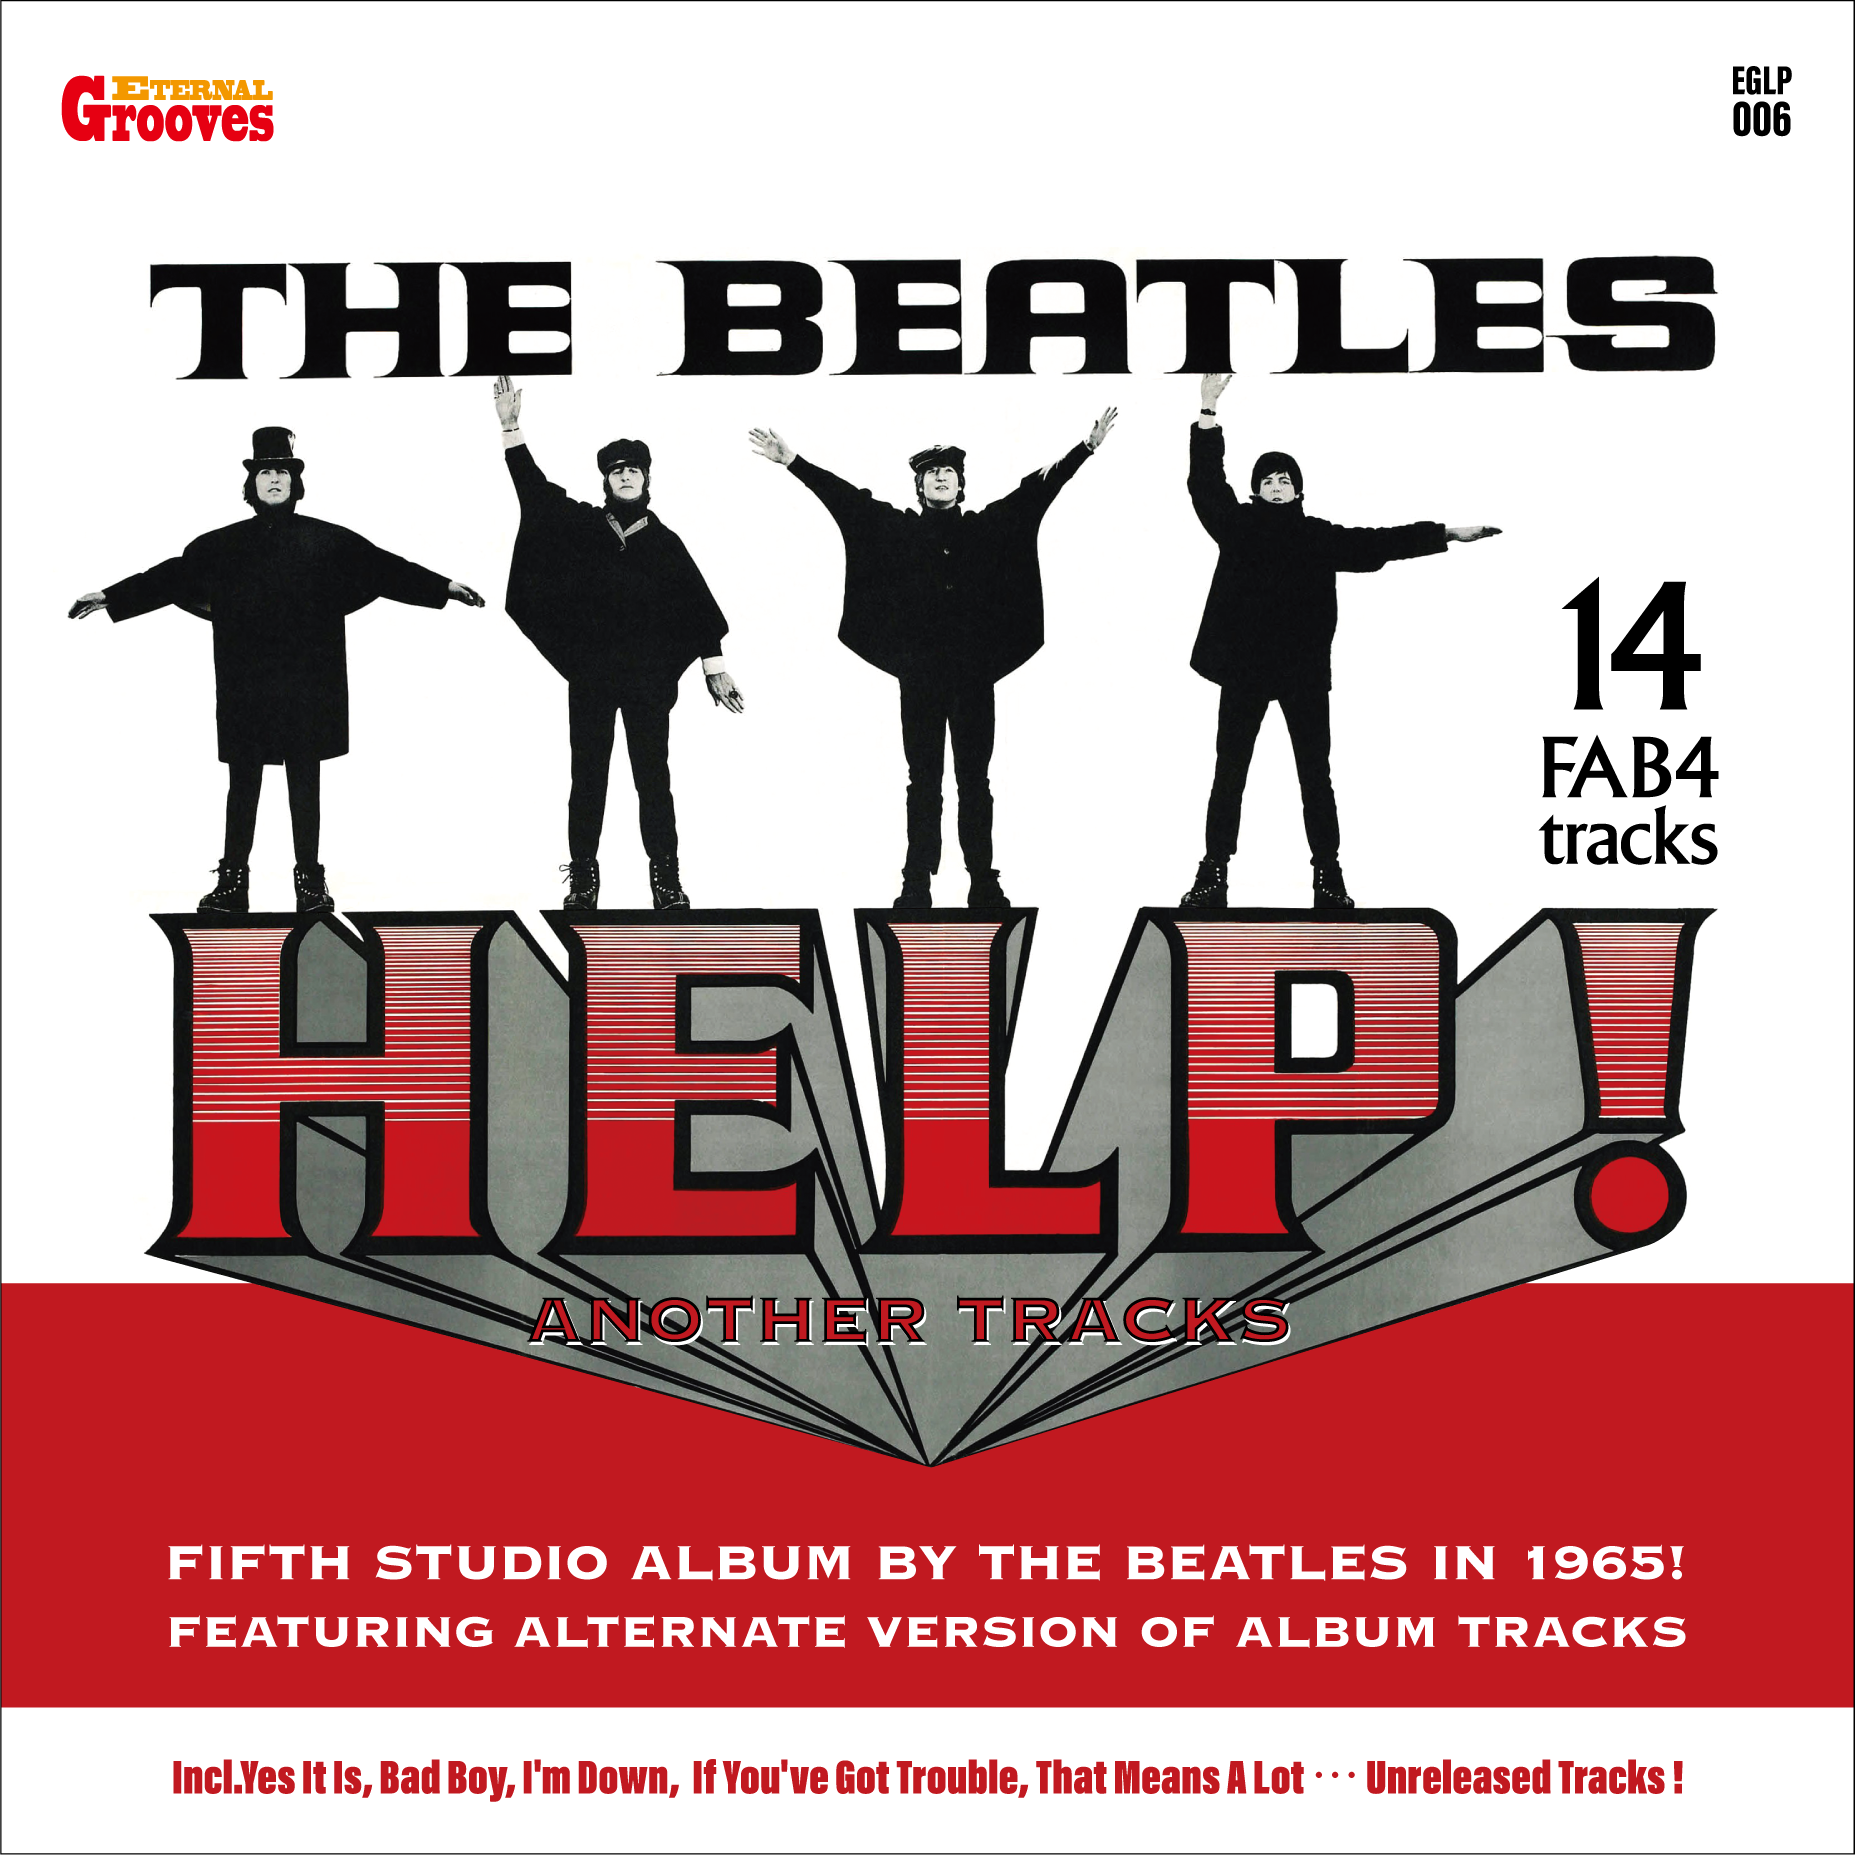 THE BEATLES / HELP! another tracks